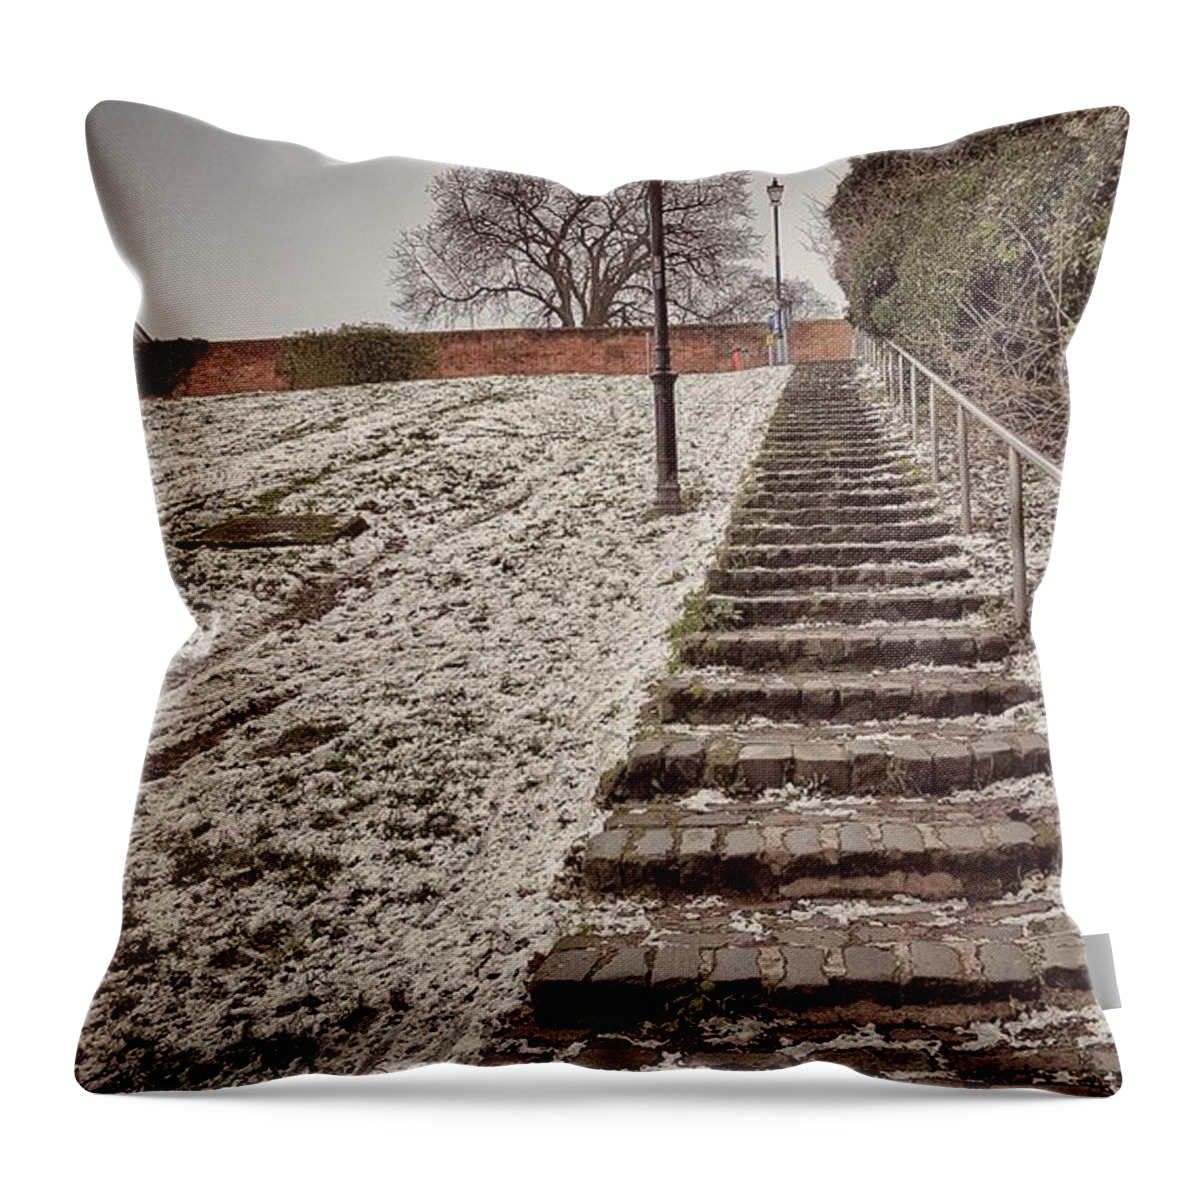 Stairway To Spring Throw Pillow featuring the photograph Stairway to Spring by Zahra Majid